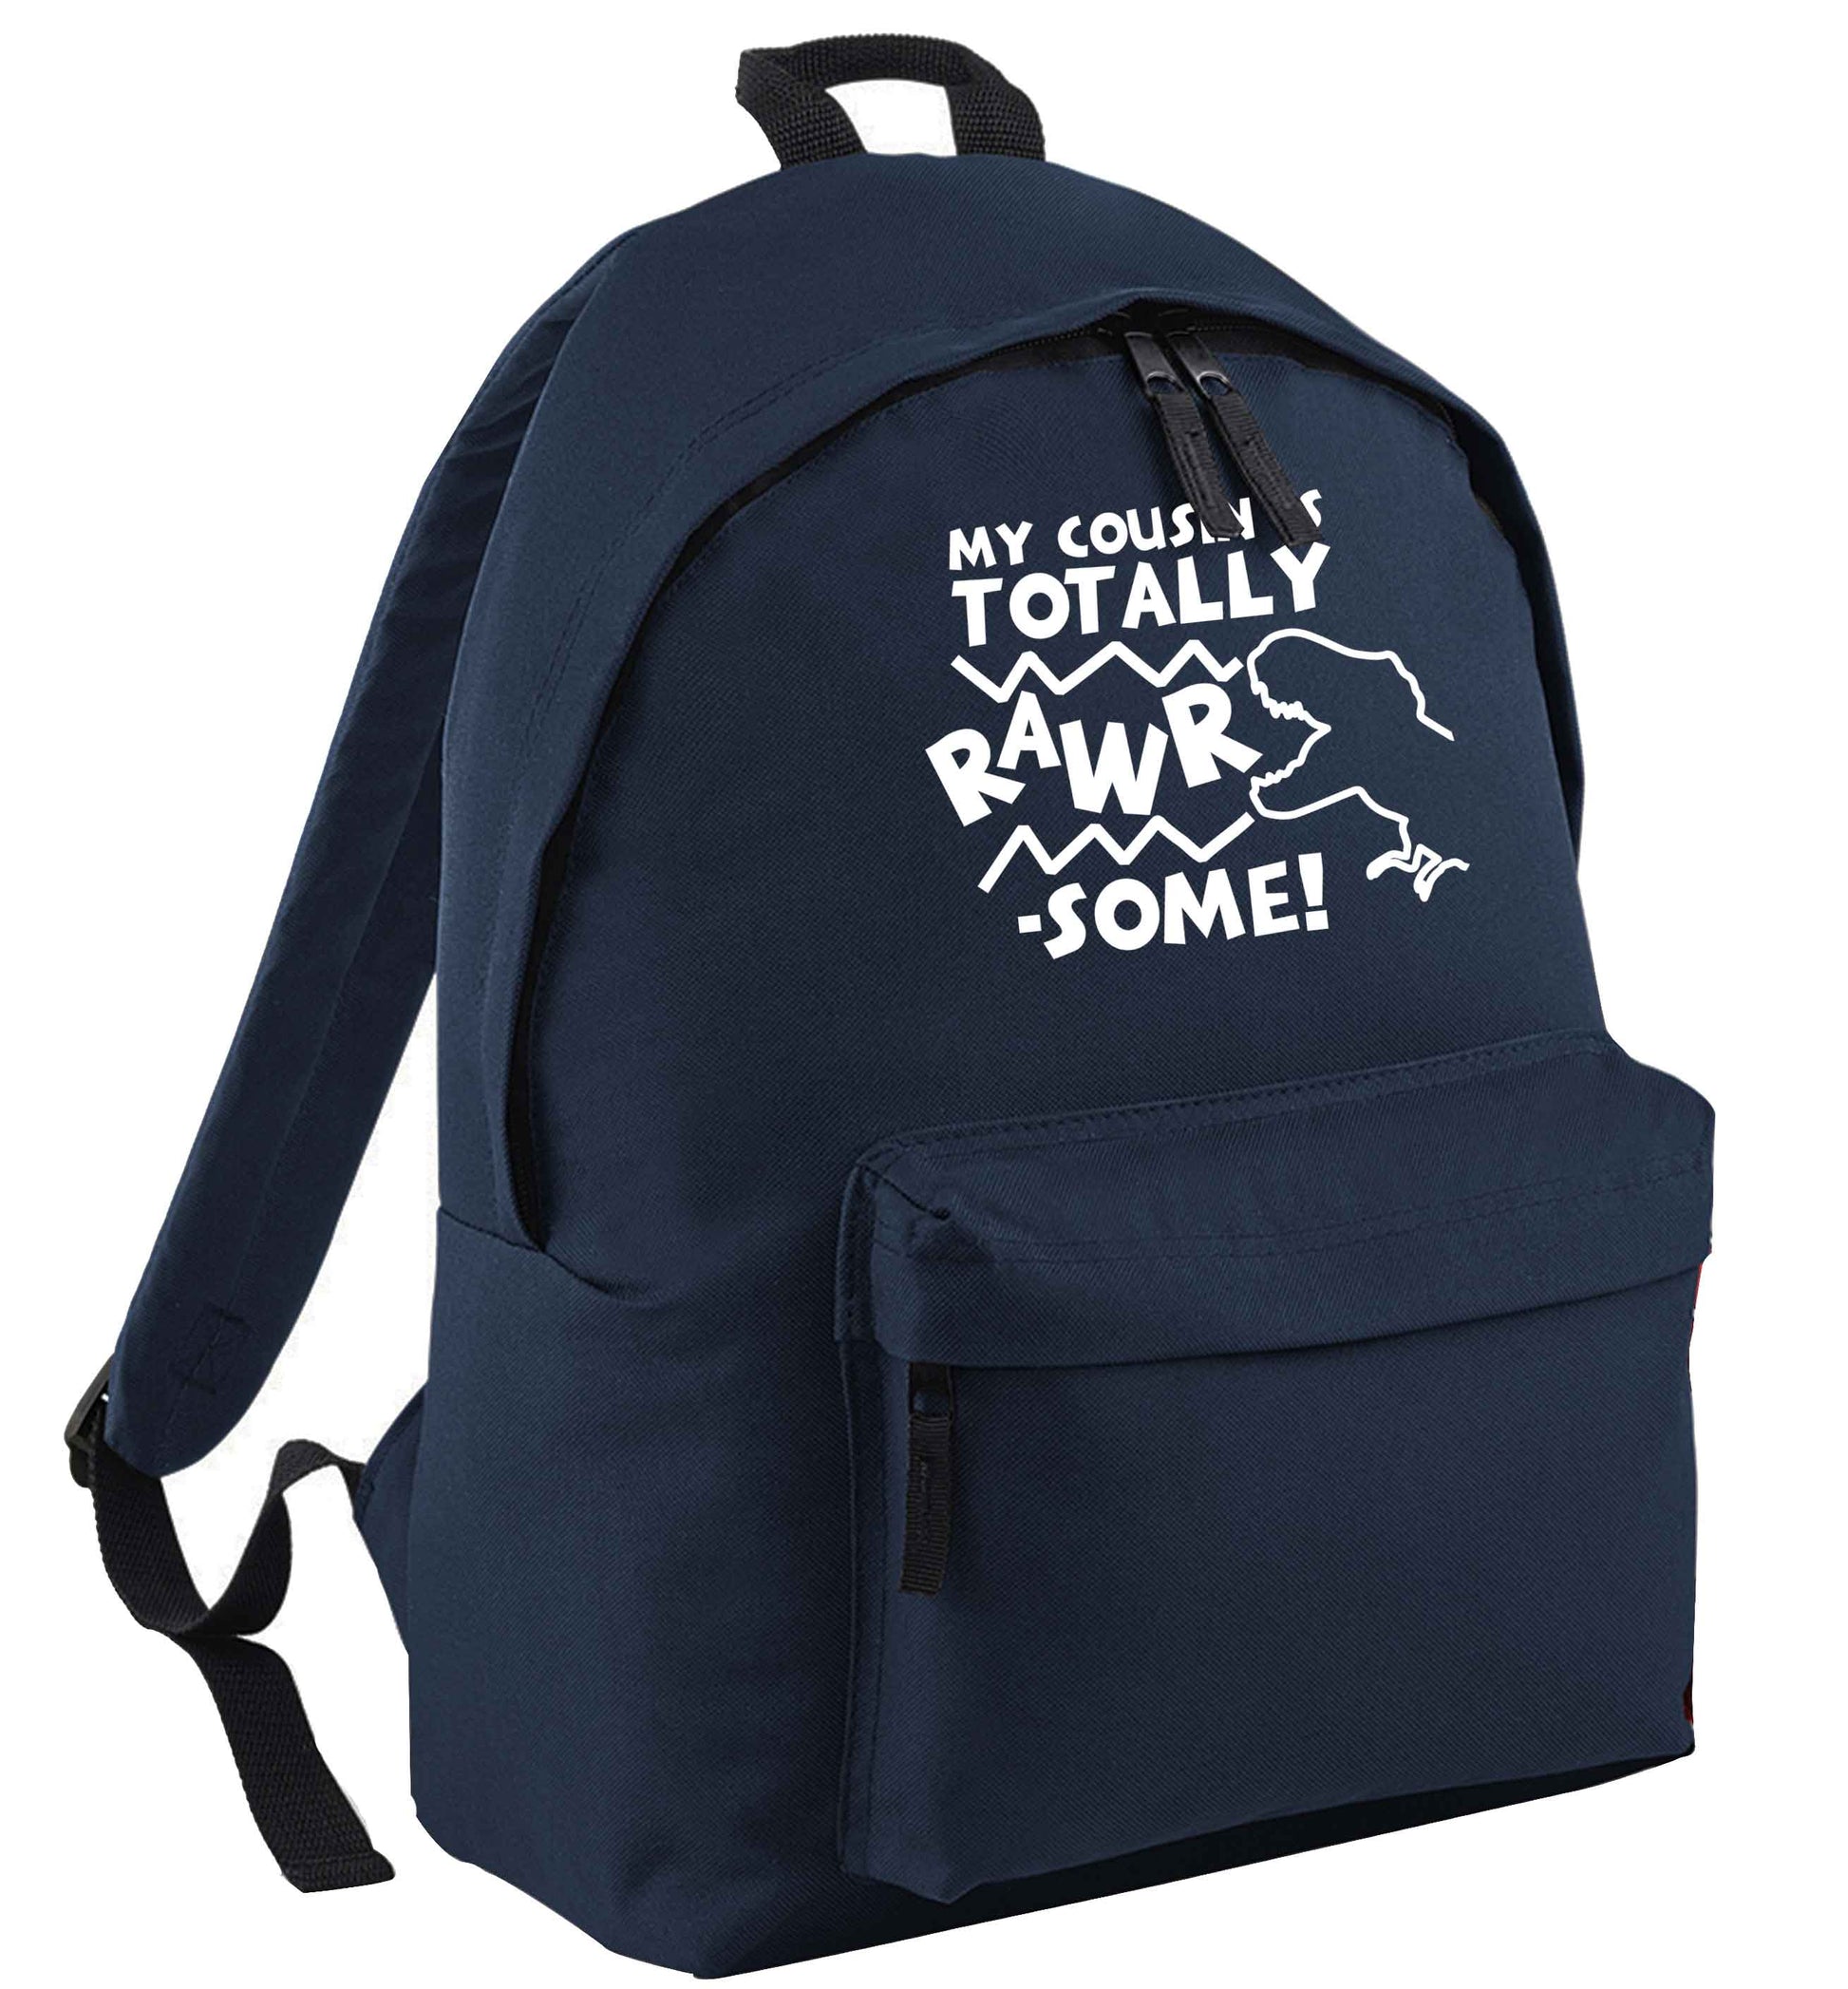 My cousin is totally rawrsome navy adults backpack